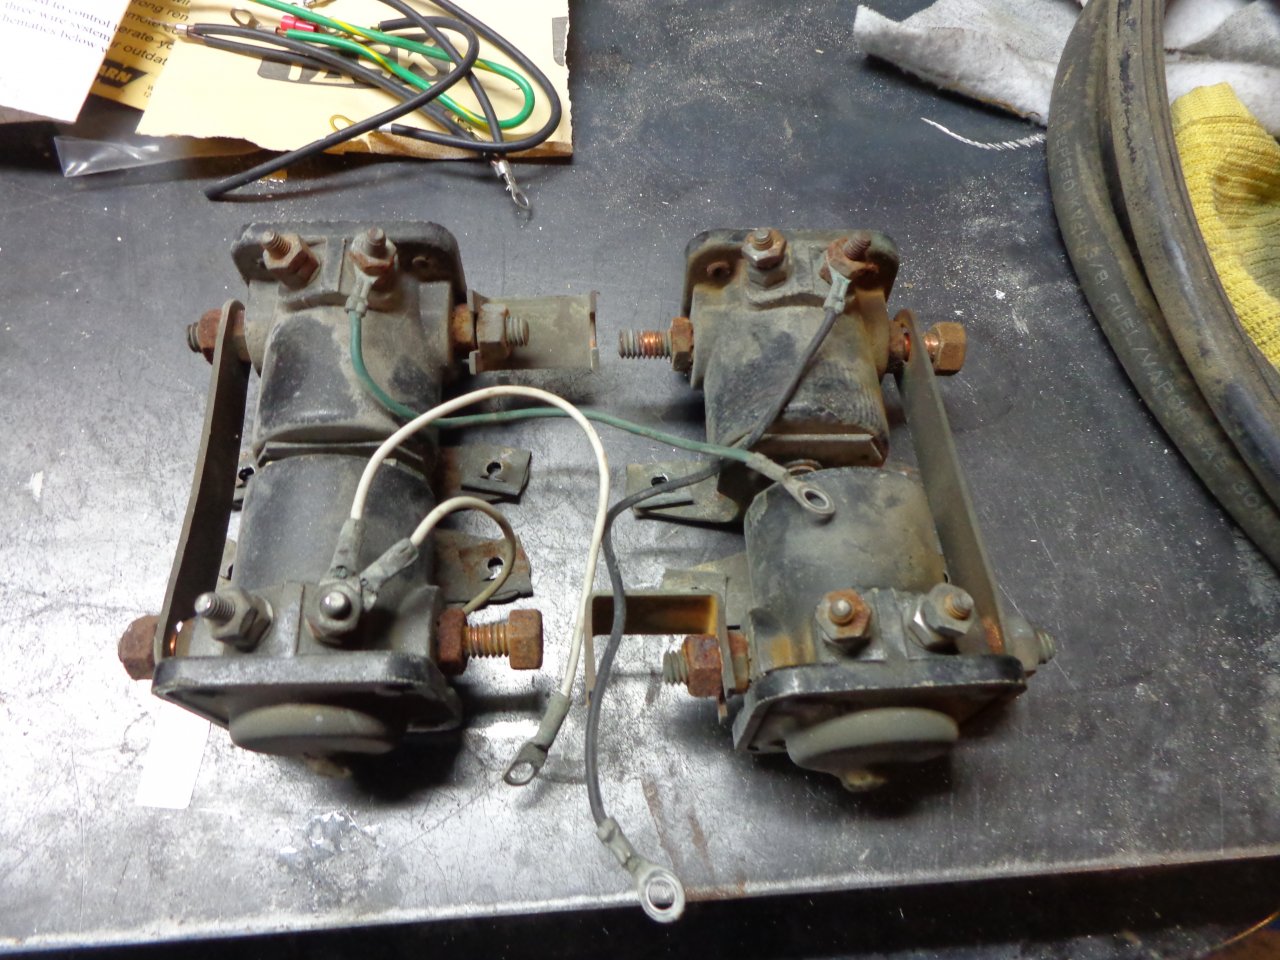 For Sale - 24v warn 8274 solenoids and winch parts | IH8MUD Forum